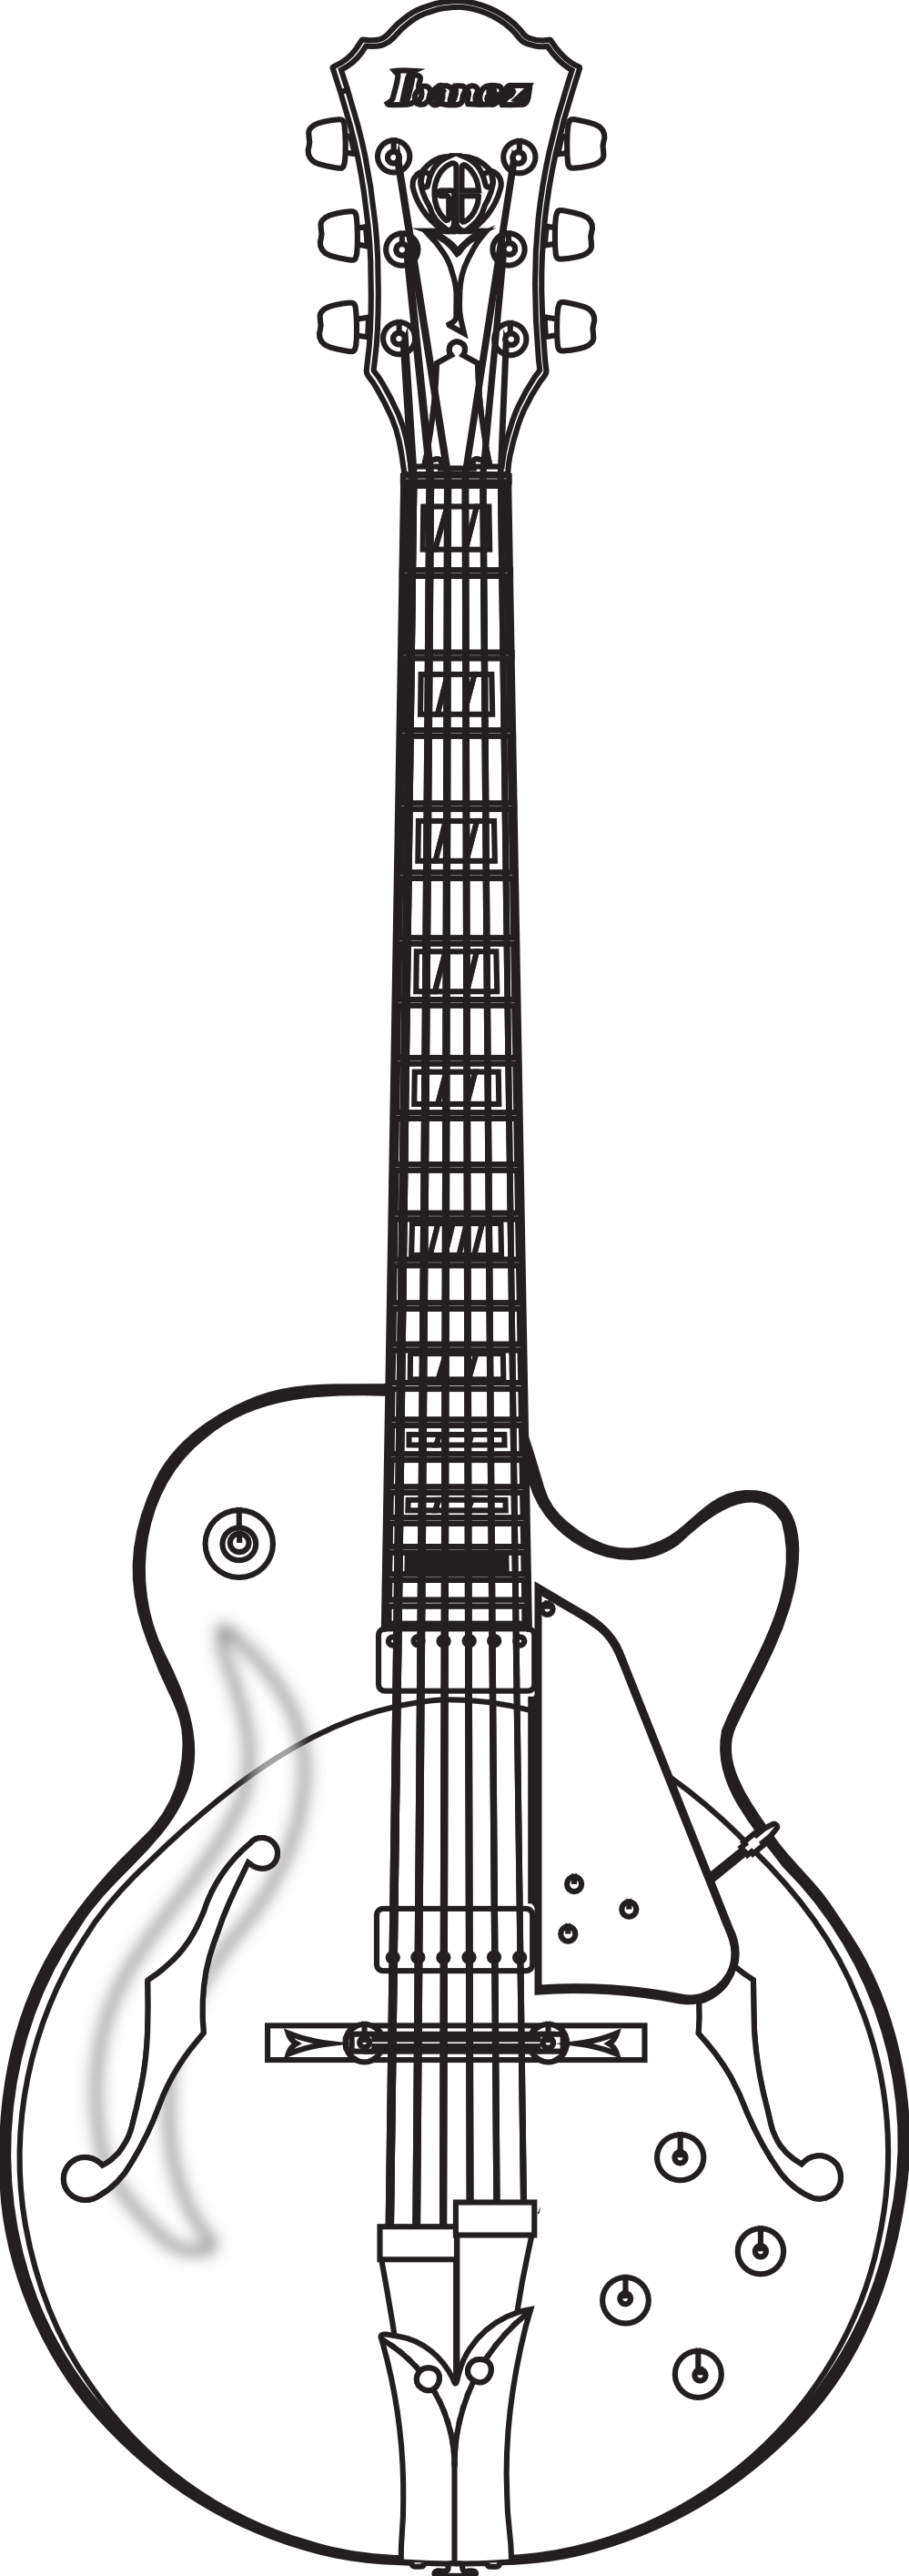 Guitar  black and white guitar clipart black and white clipartfest